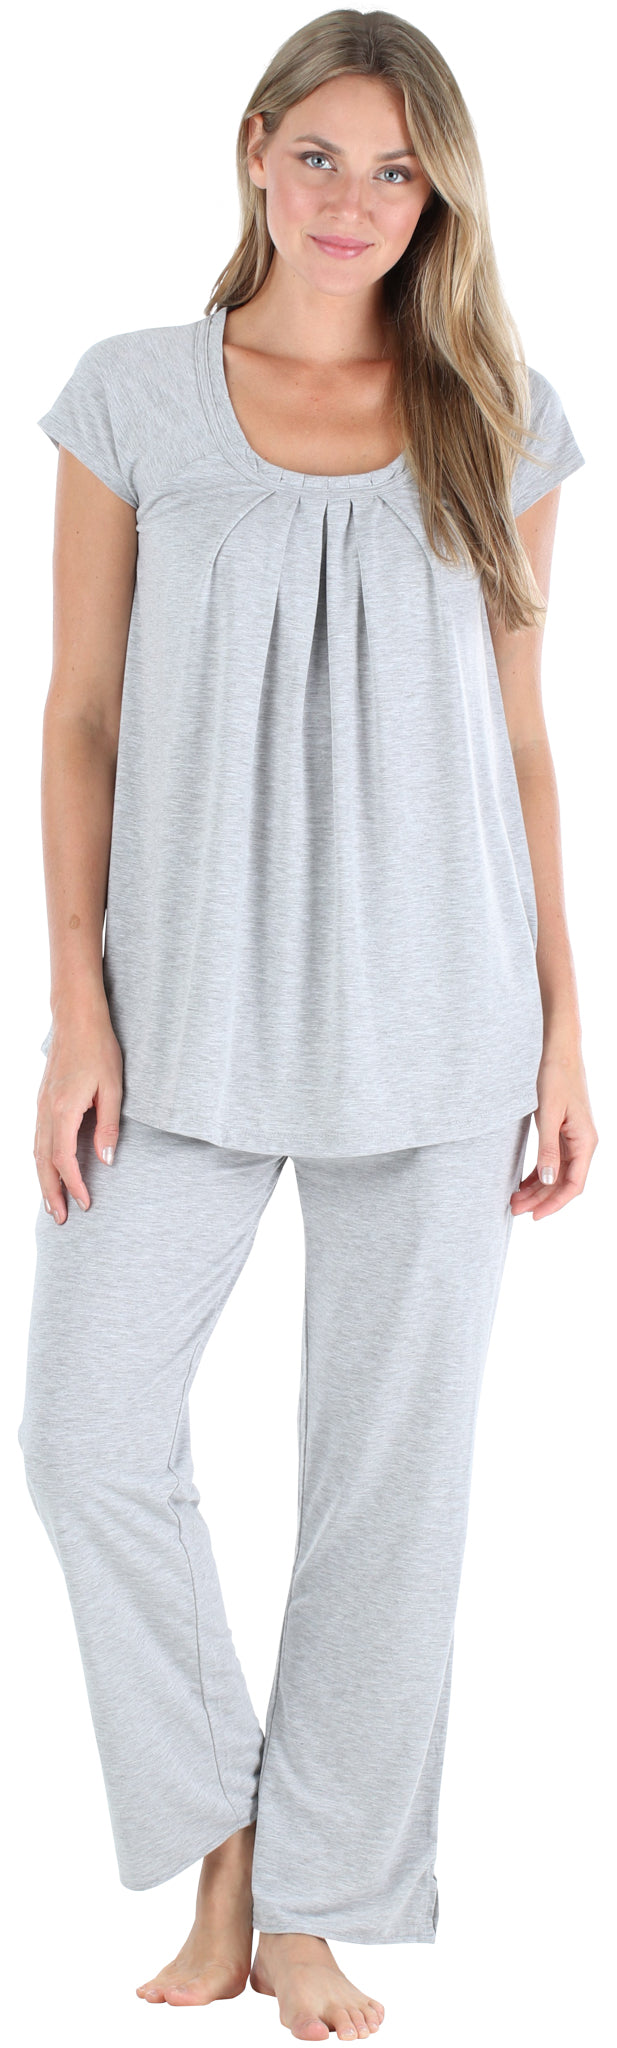 Stretchy Knit Oversized Top and Pants Set